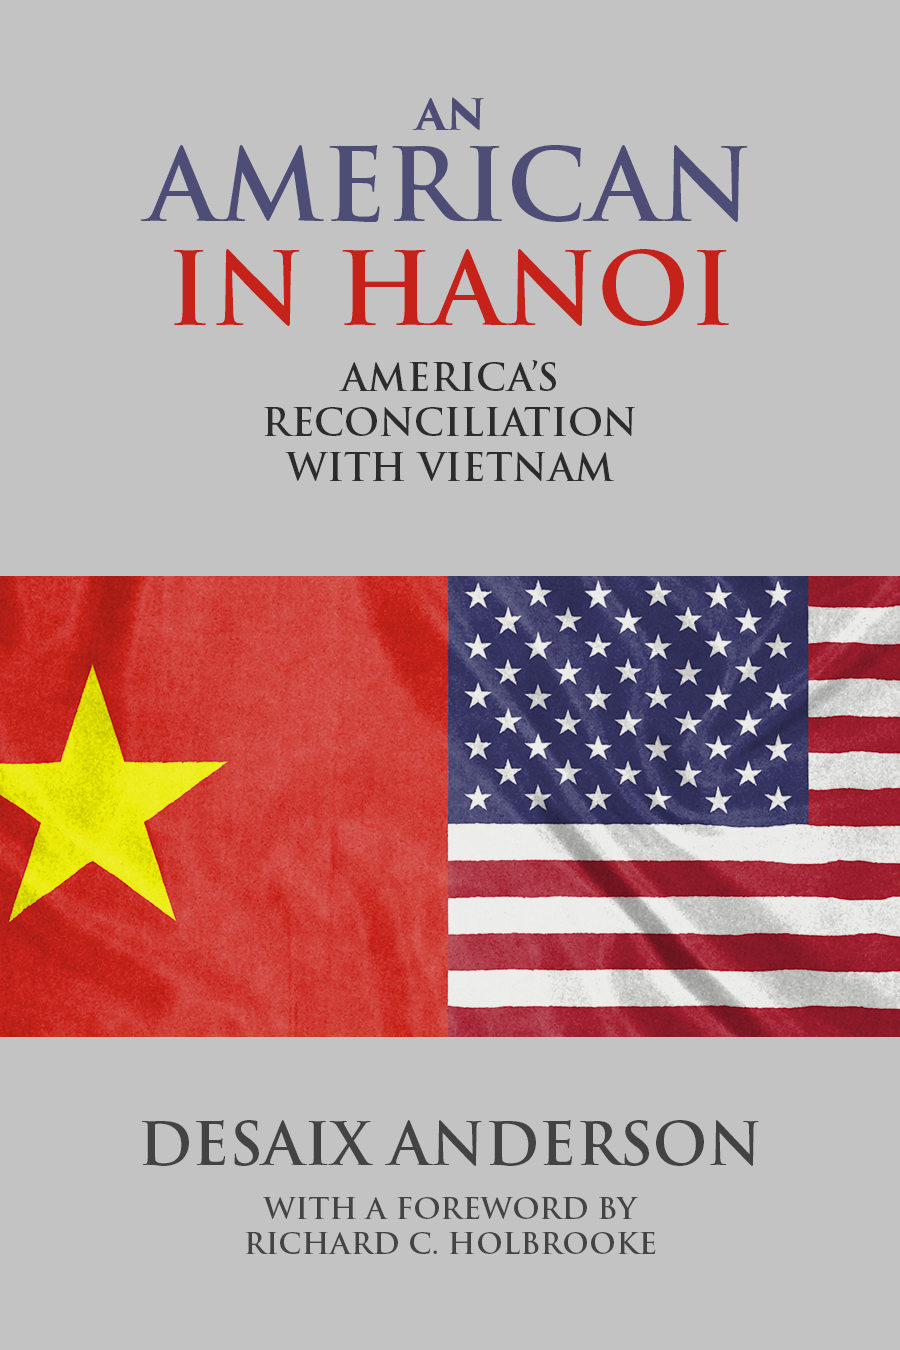 The cover of An American in Hanoi